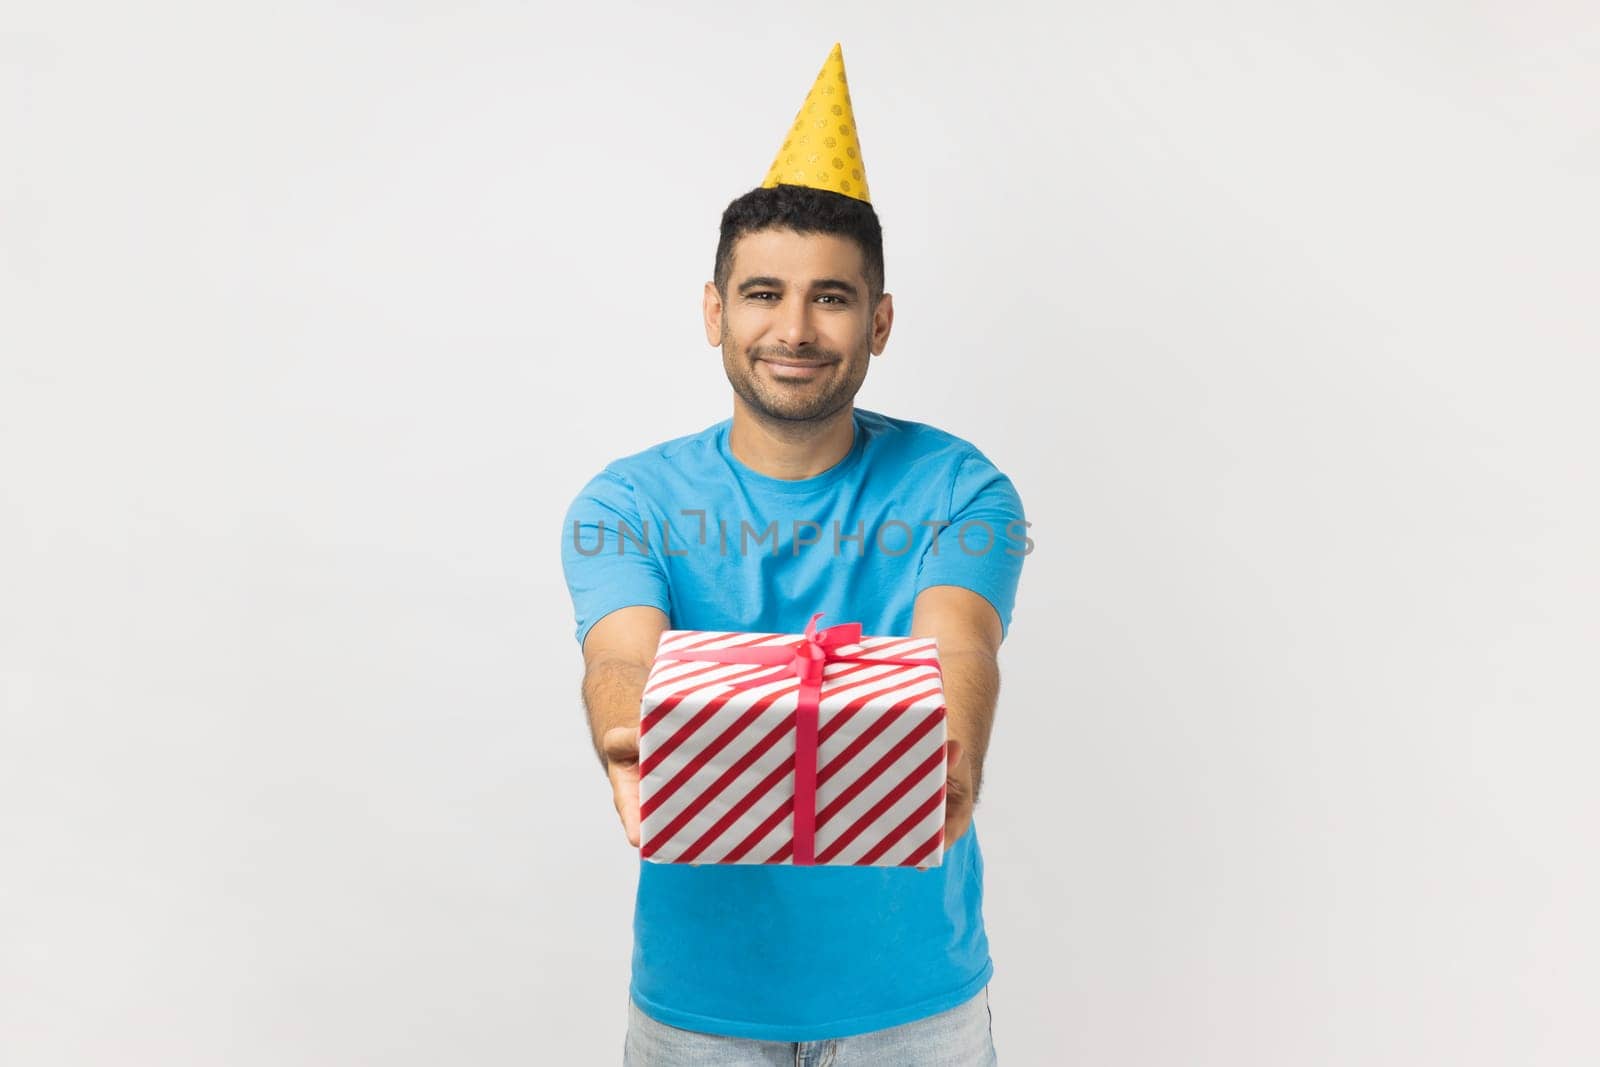 Portrait of cute attractive positive unshaven man wearing blue T- shirt and yellow party cone giving present box, having fun at birthday party. Indoor studio shot isolated on gray background.